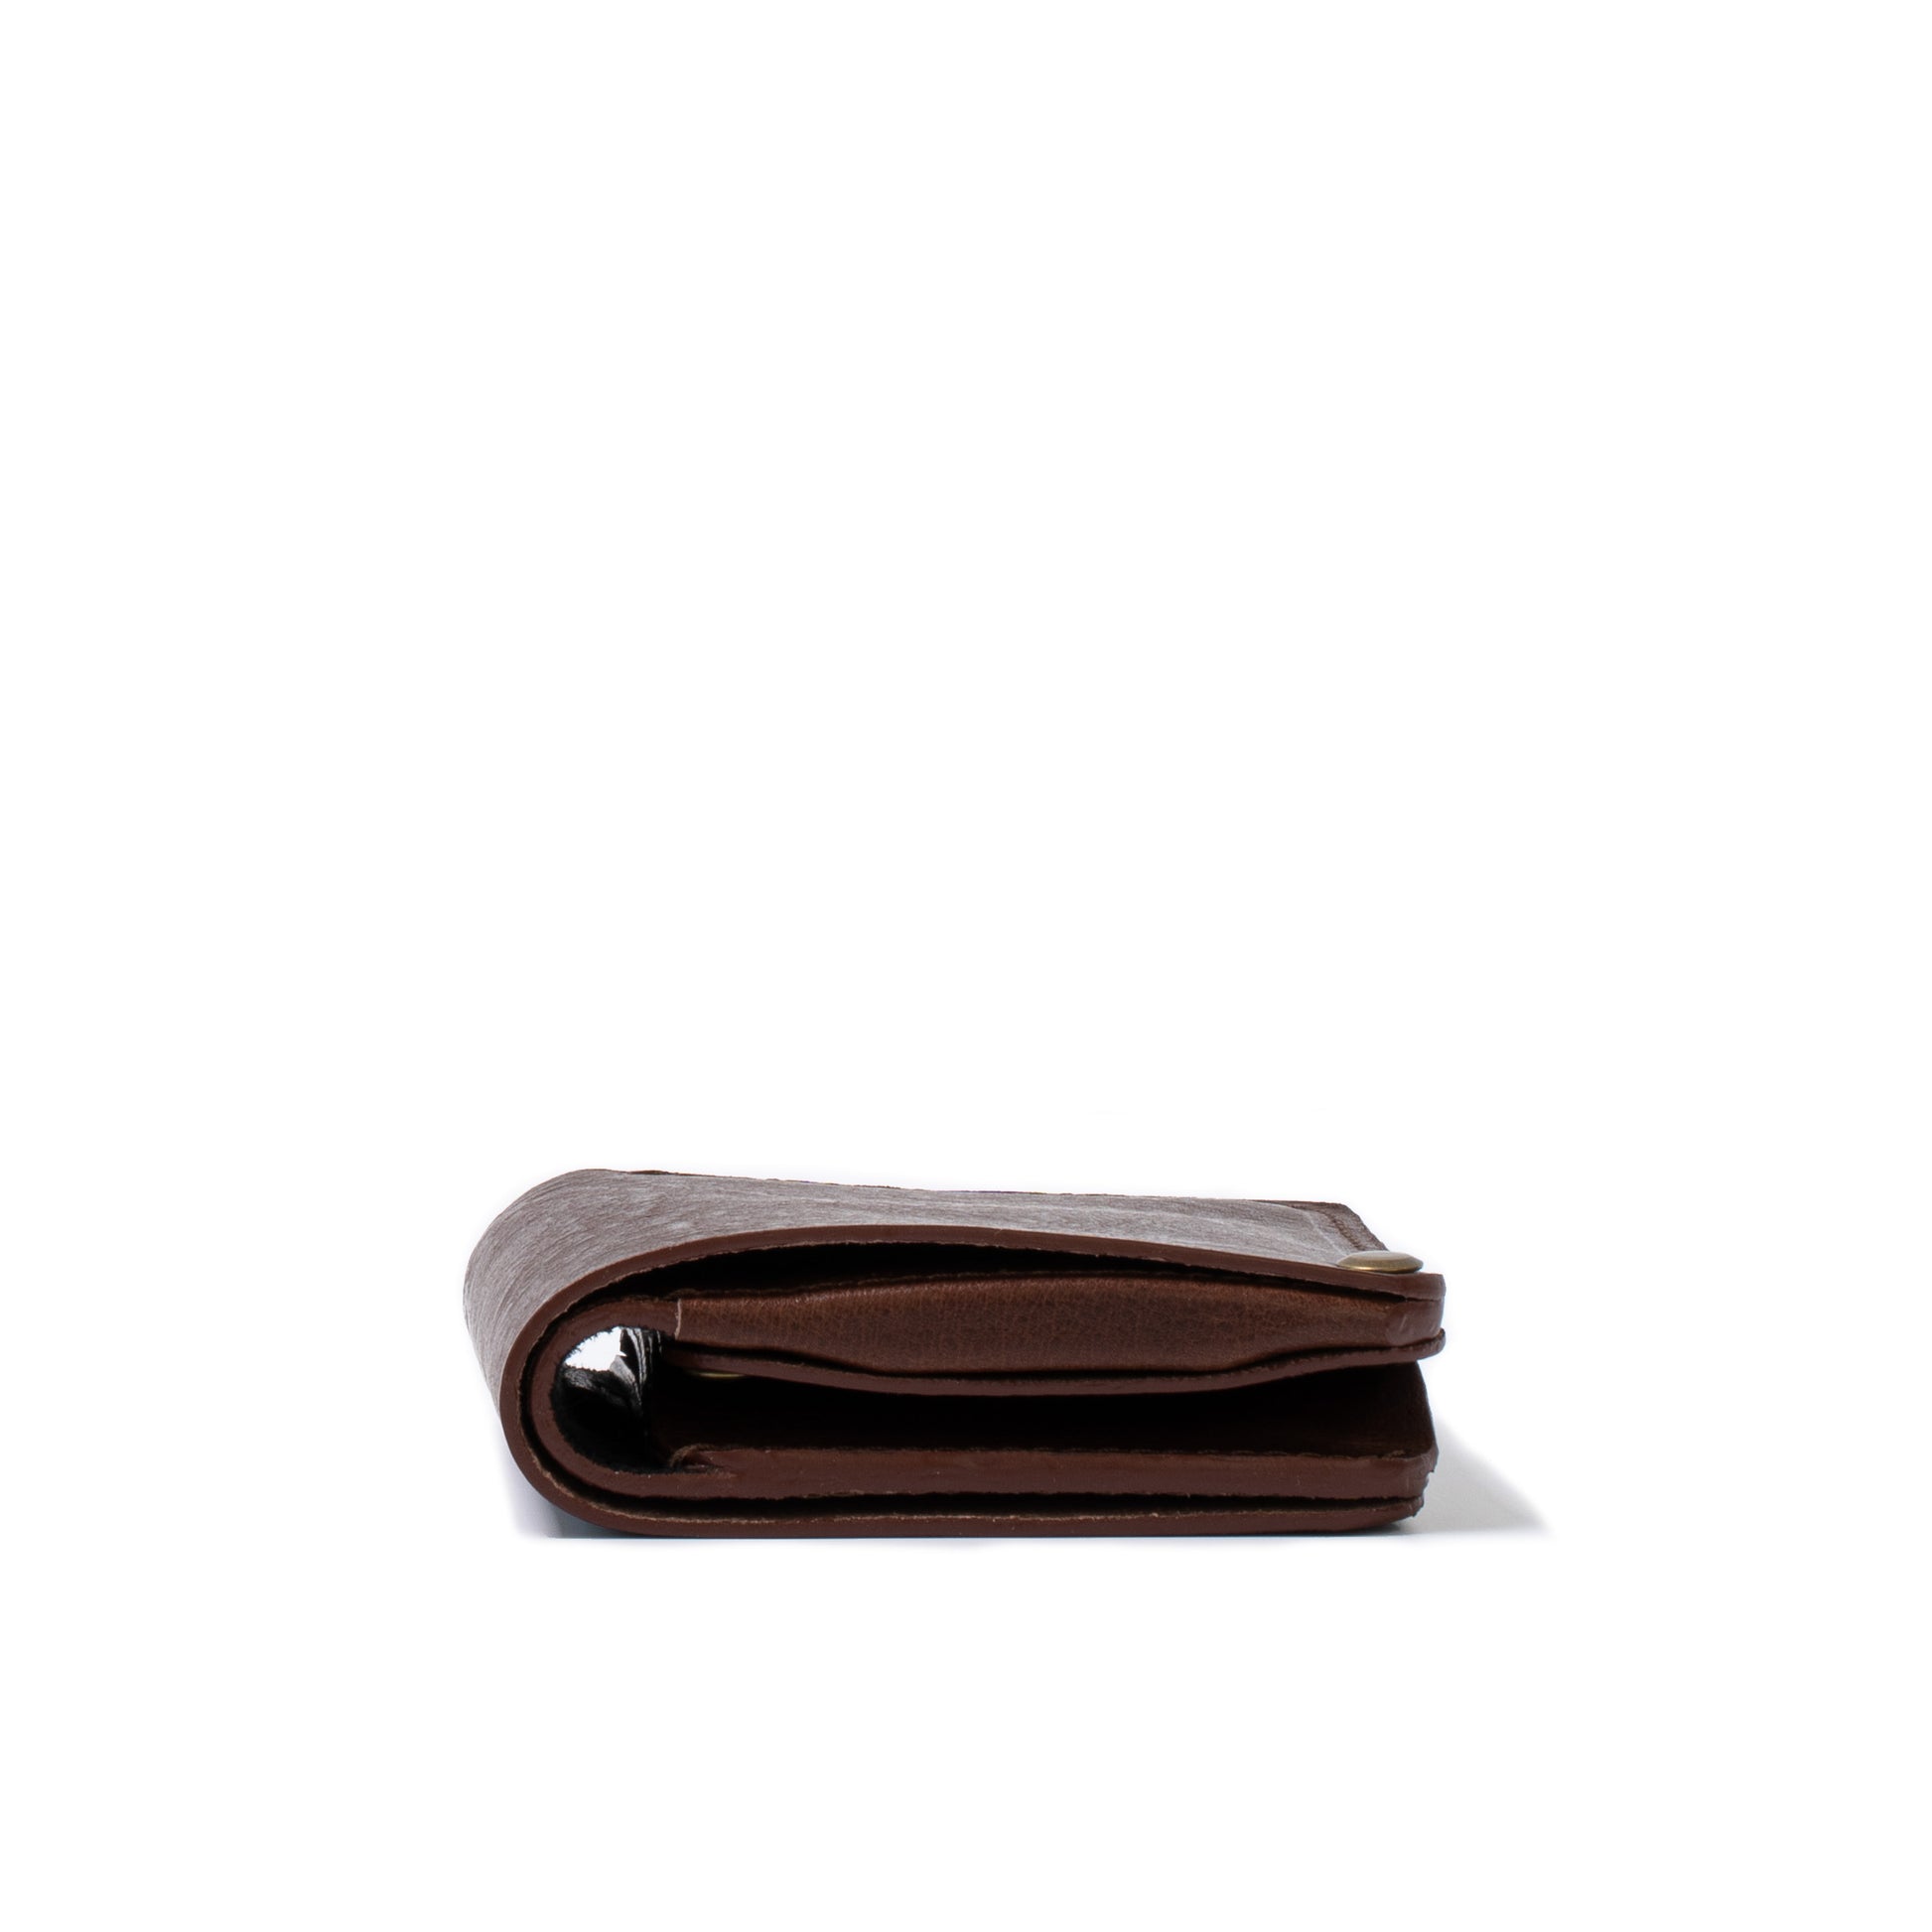 Leather AirTag Wallet - The Minimalist by Geometric Goods Mahogany